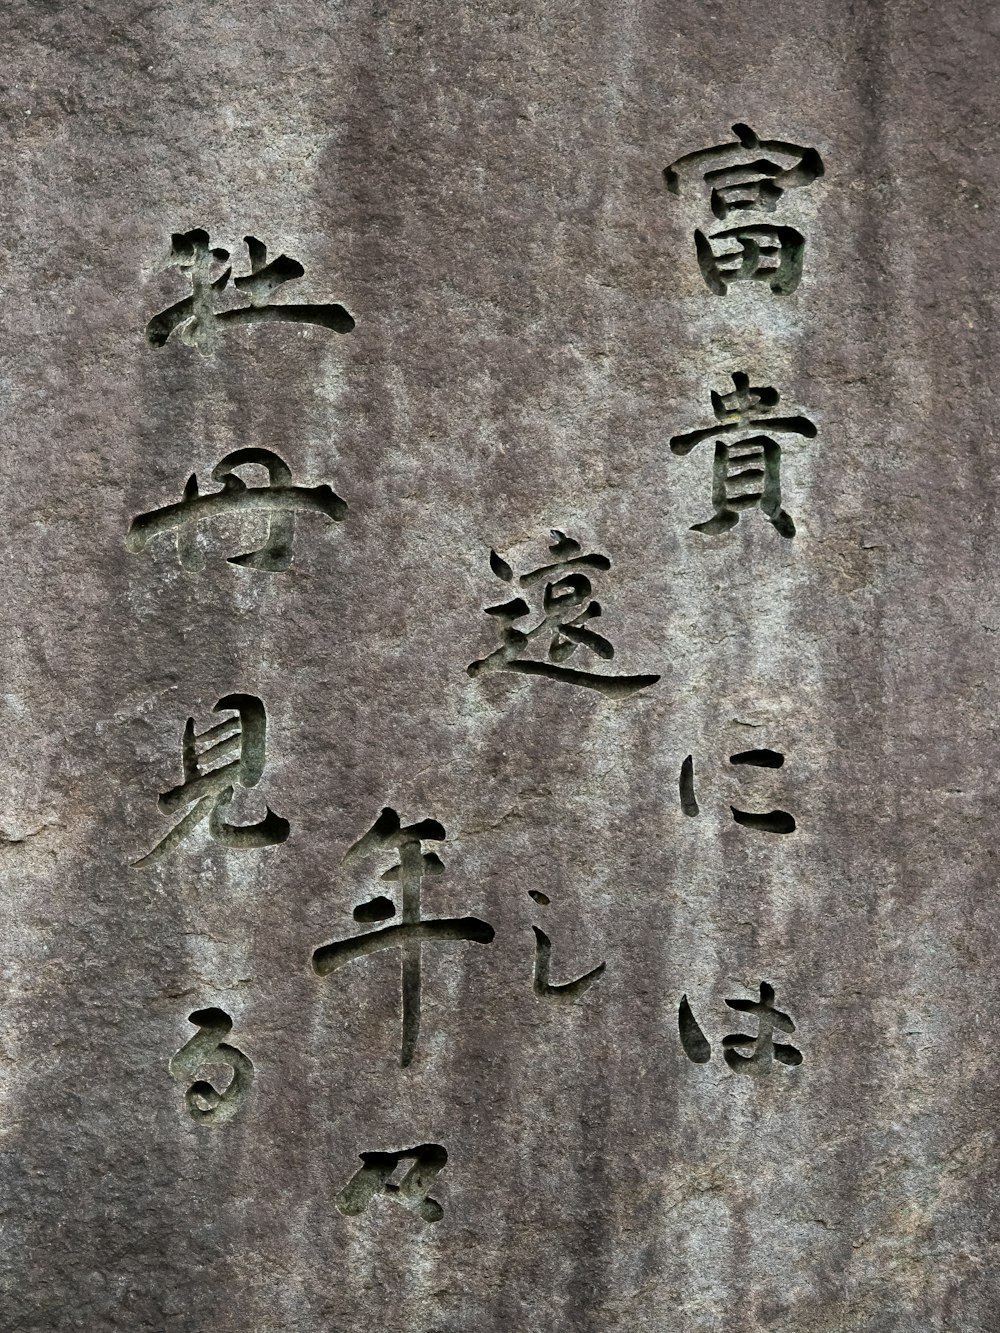 a close up of a stone with writing on it